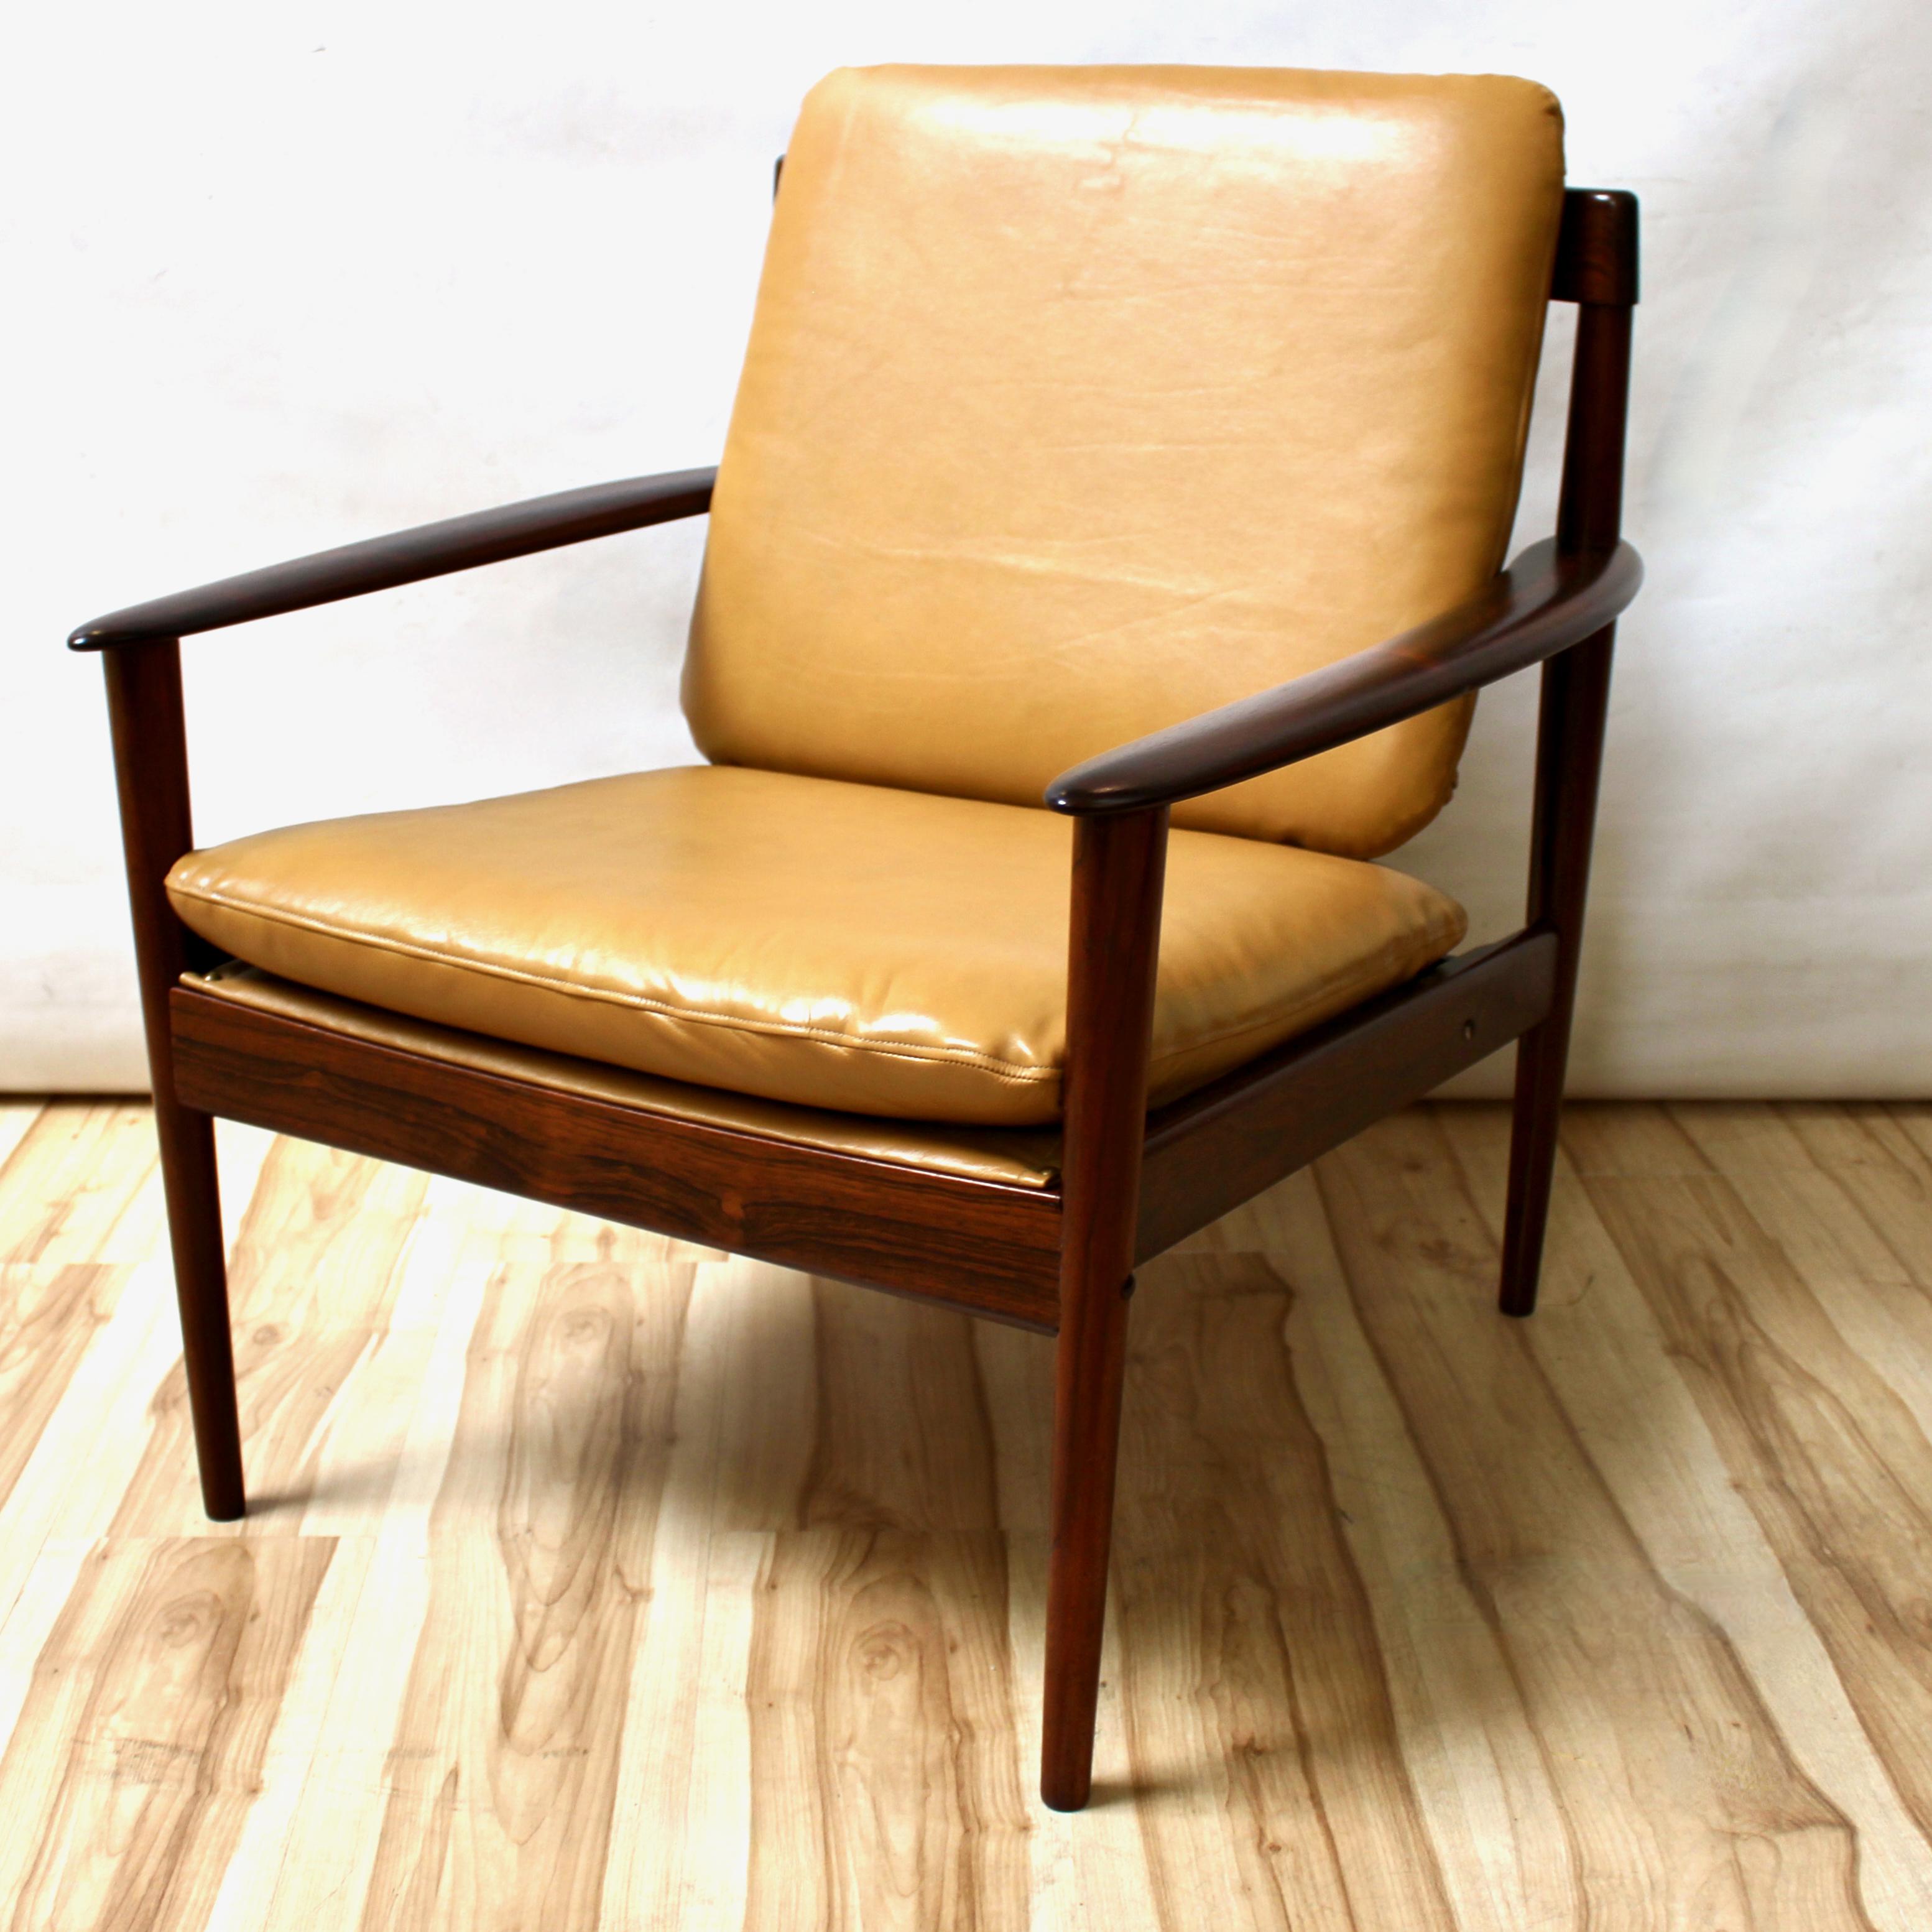 1950s Danish Modern rosewood model 56 lounge chair designed by Greta Jalk for Poul Jeppesen with leather seat and back The chair has been professionally restored and reupholstered with new material. In excellent condition.

Width: 28 in / Depth: